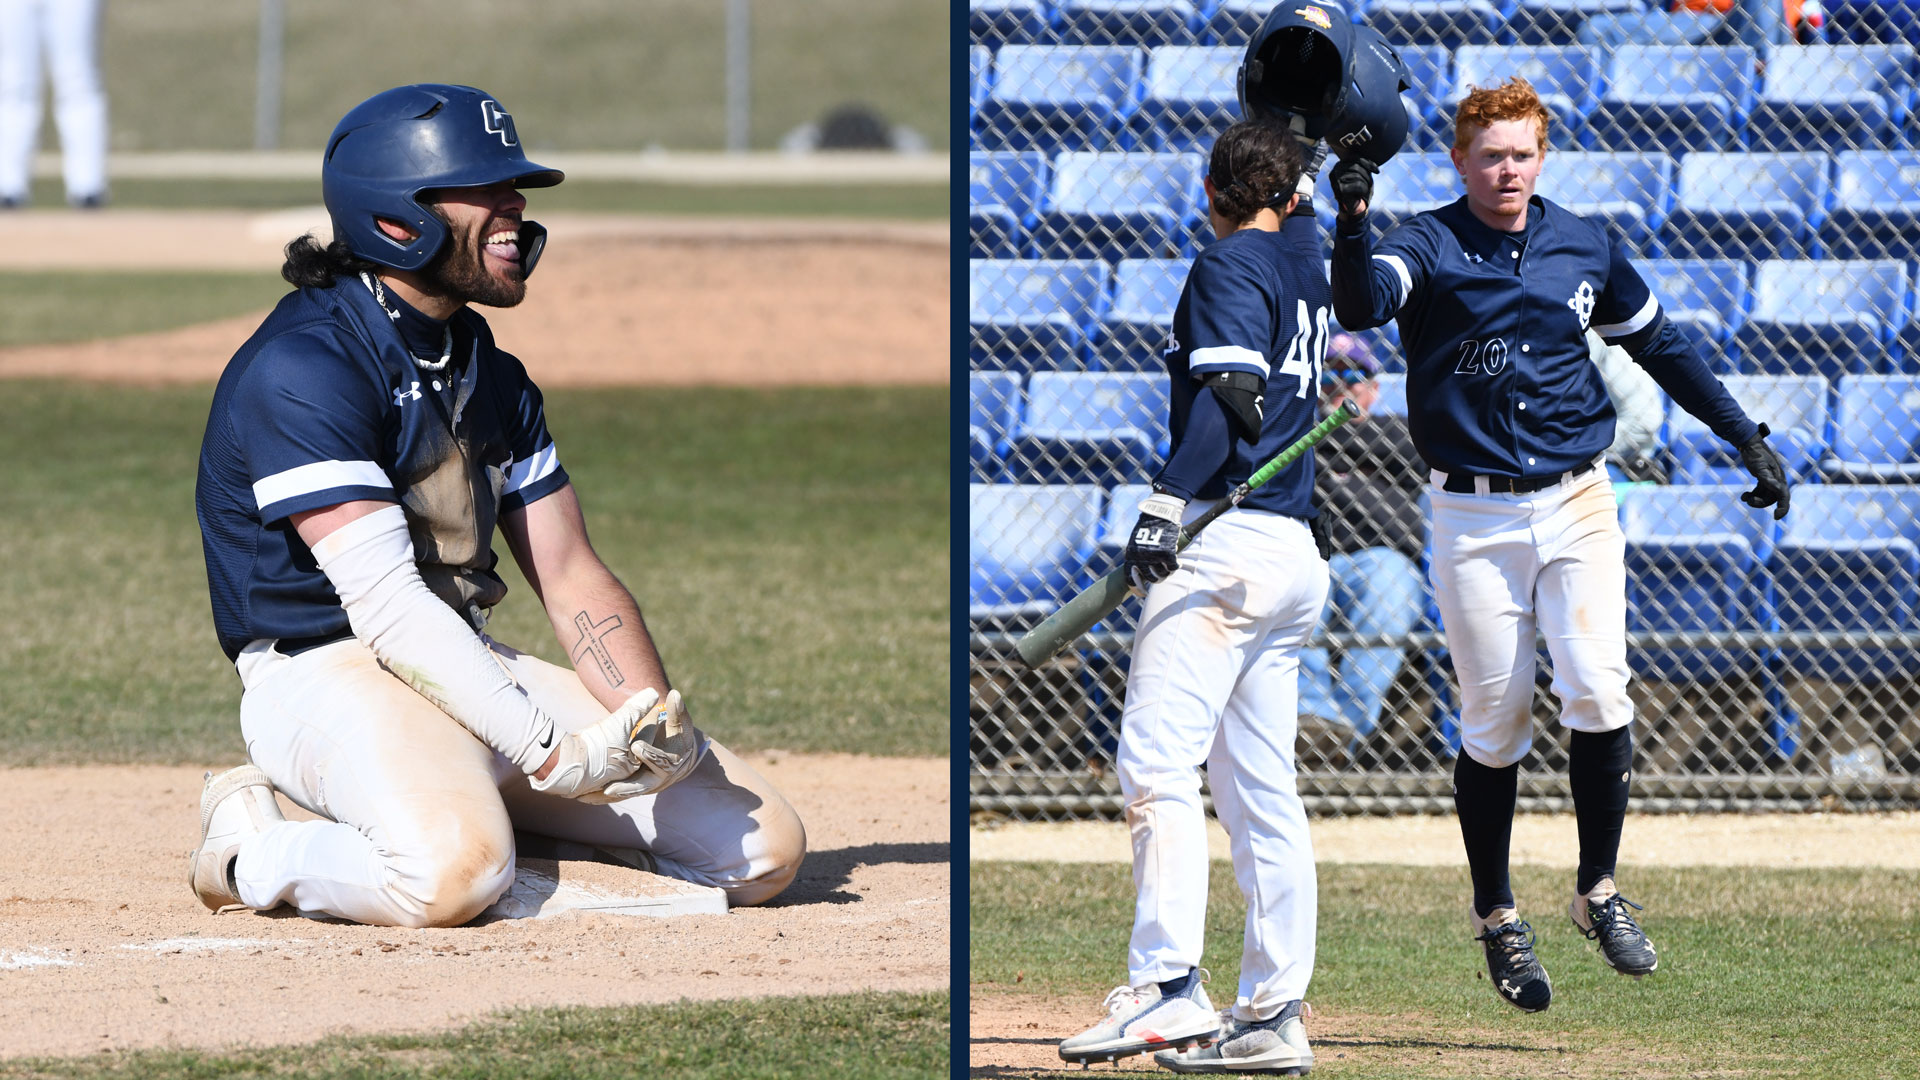 O'Connor and Torres continue to swing hot bats as Pride take first two from Missouri Valley